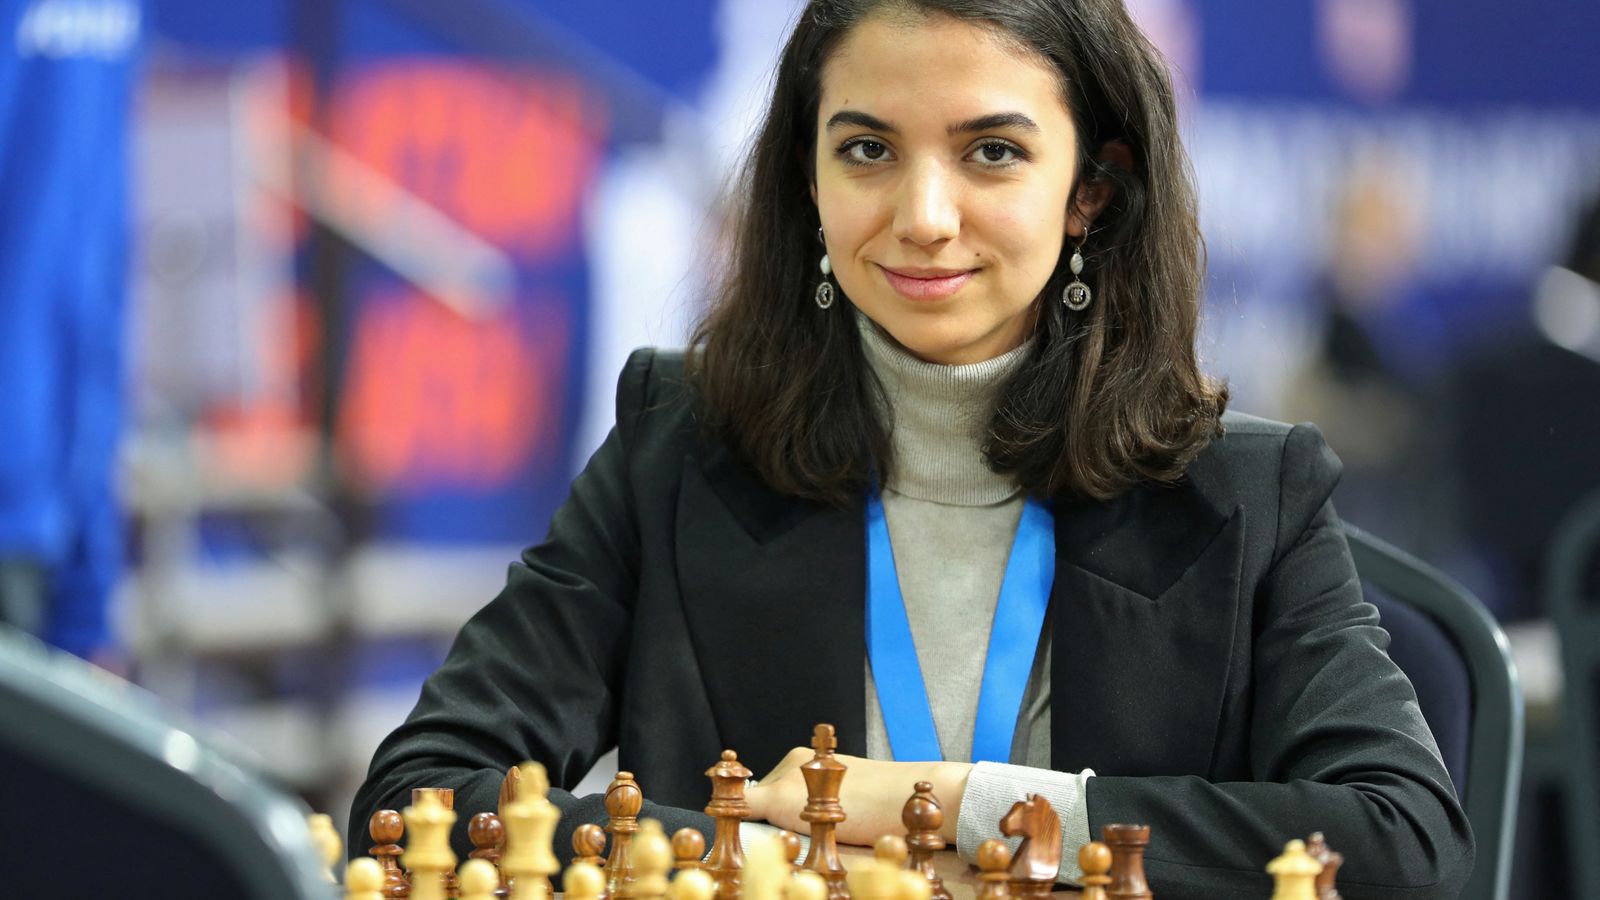 Iranian chess player Sara Khadem who competed without hijab 'lands in Spain after threats'